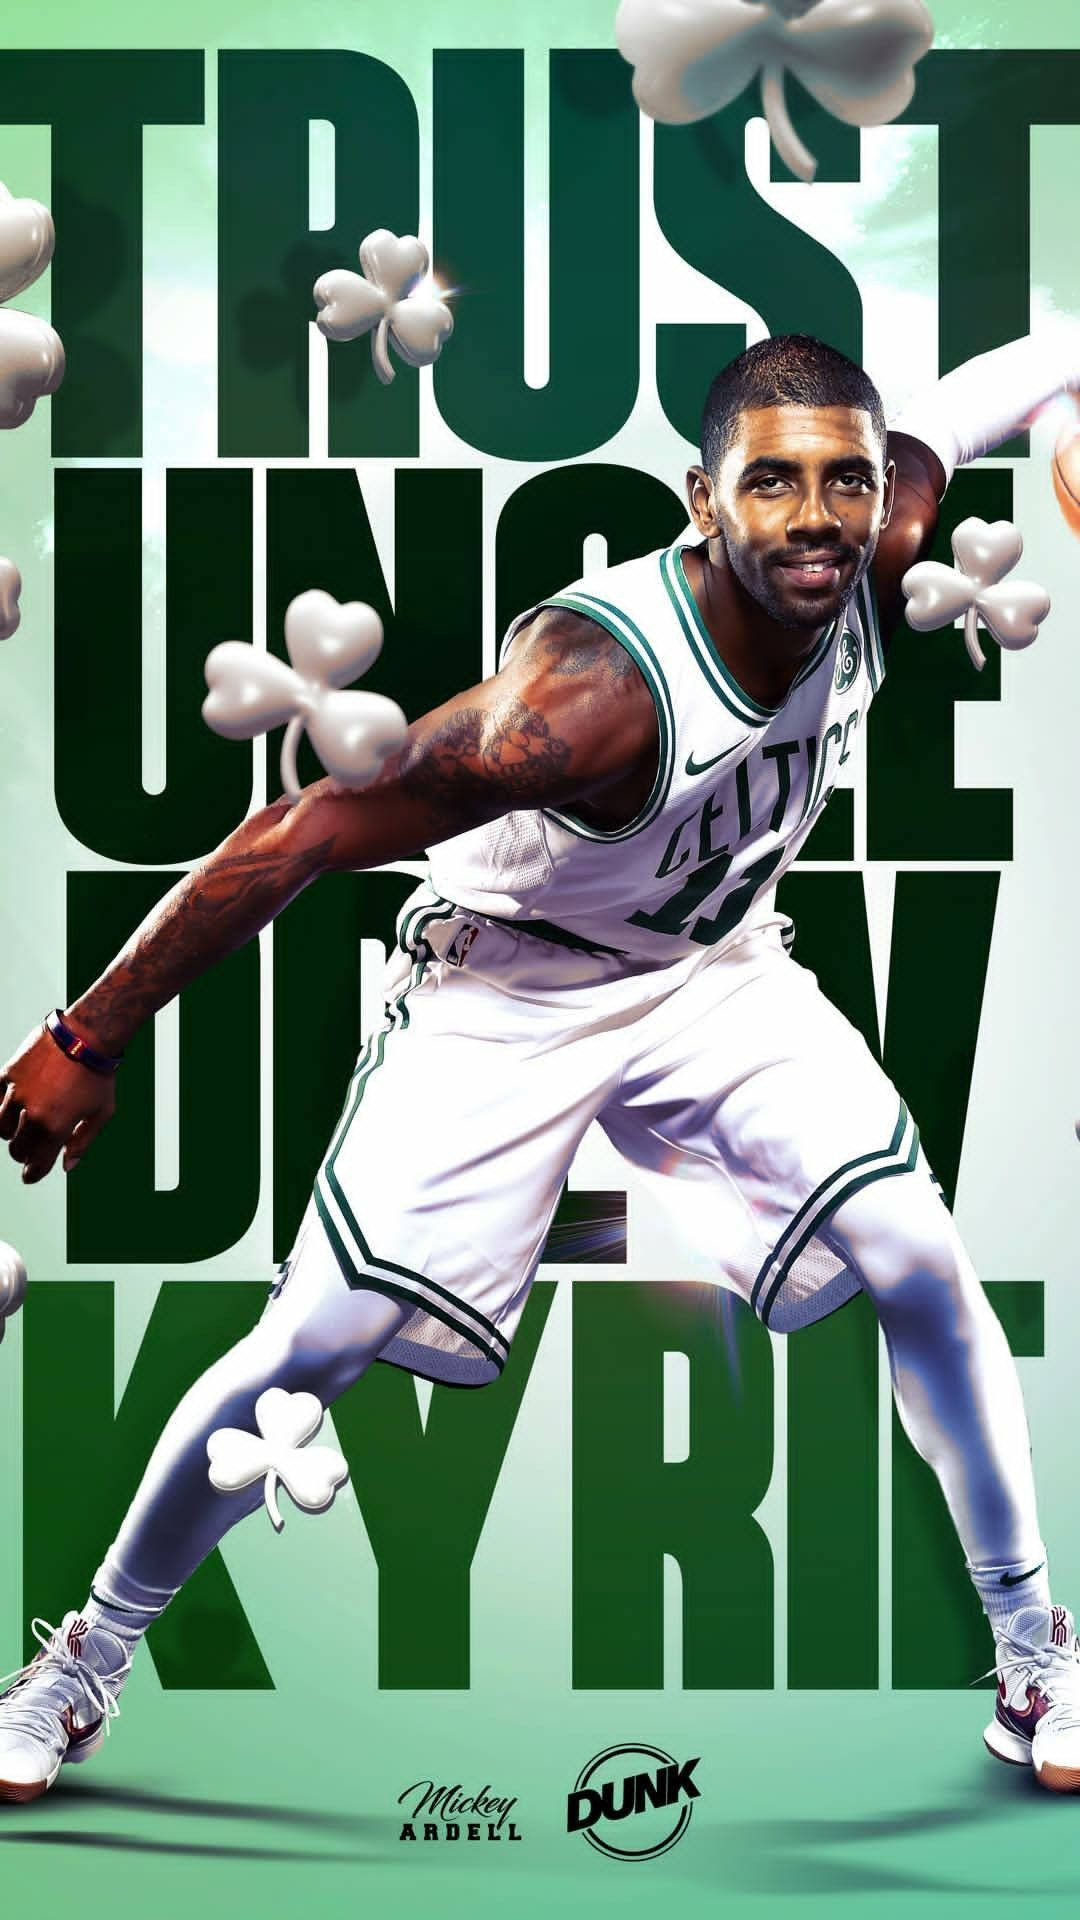 Kyrie Irving Wallpaper. Basketball. Kyrie Irving Background